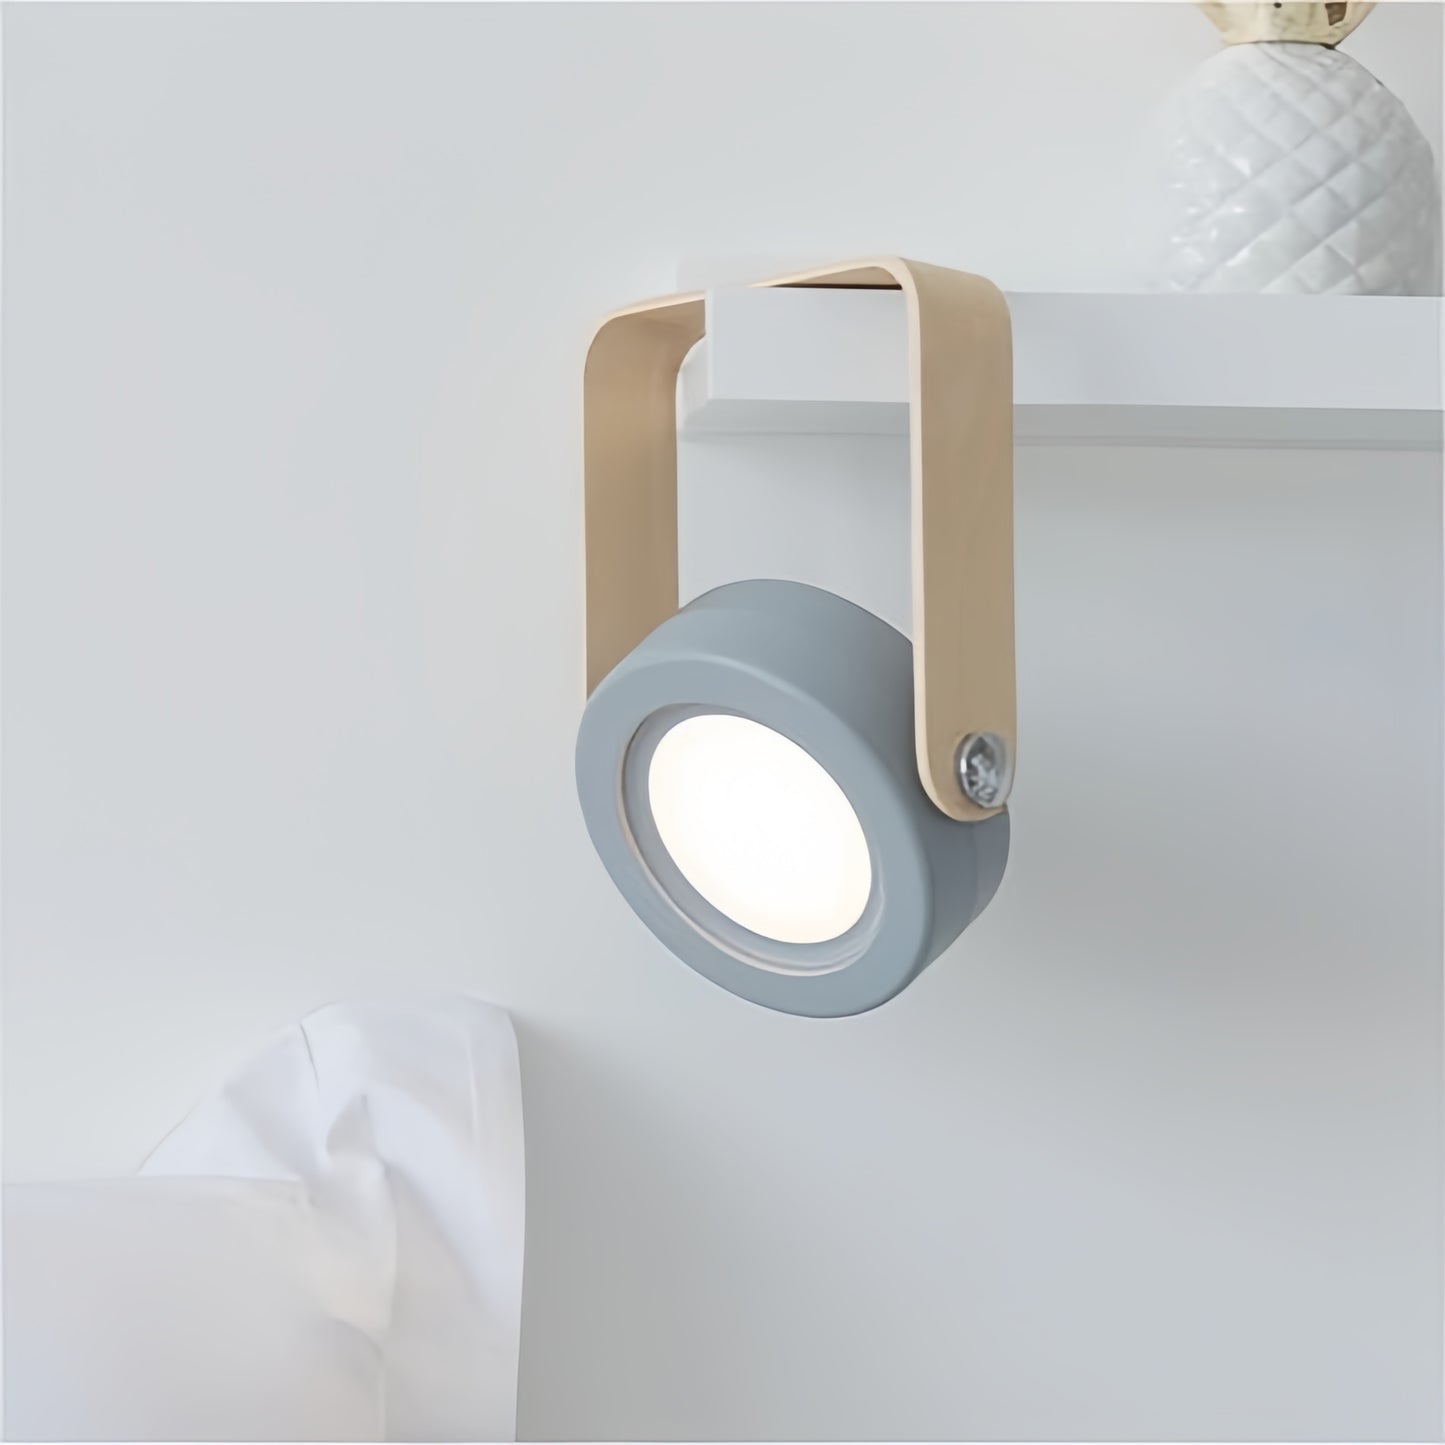 Innovative Rechargeable Lantern and Table Lamp - Versatile Lighting Solution